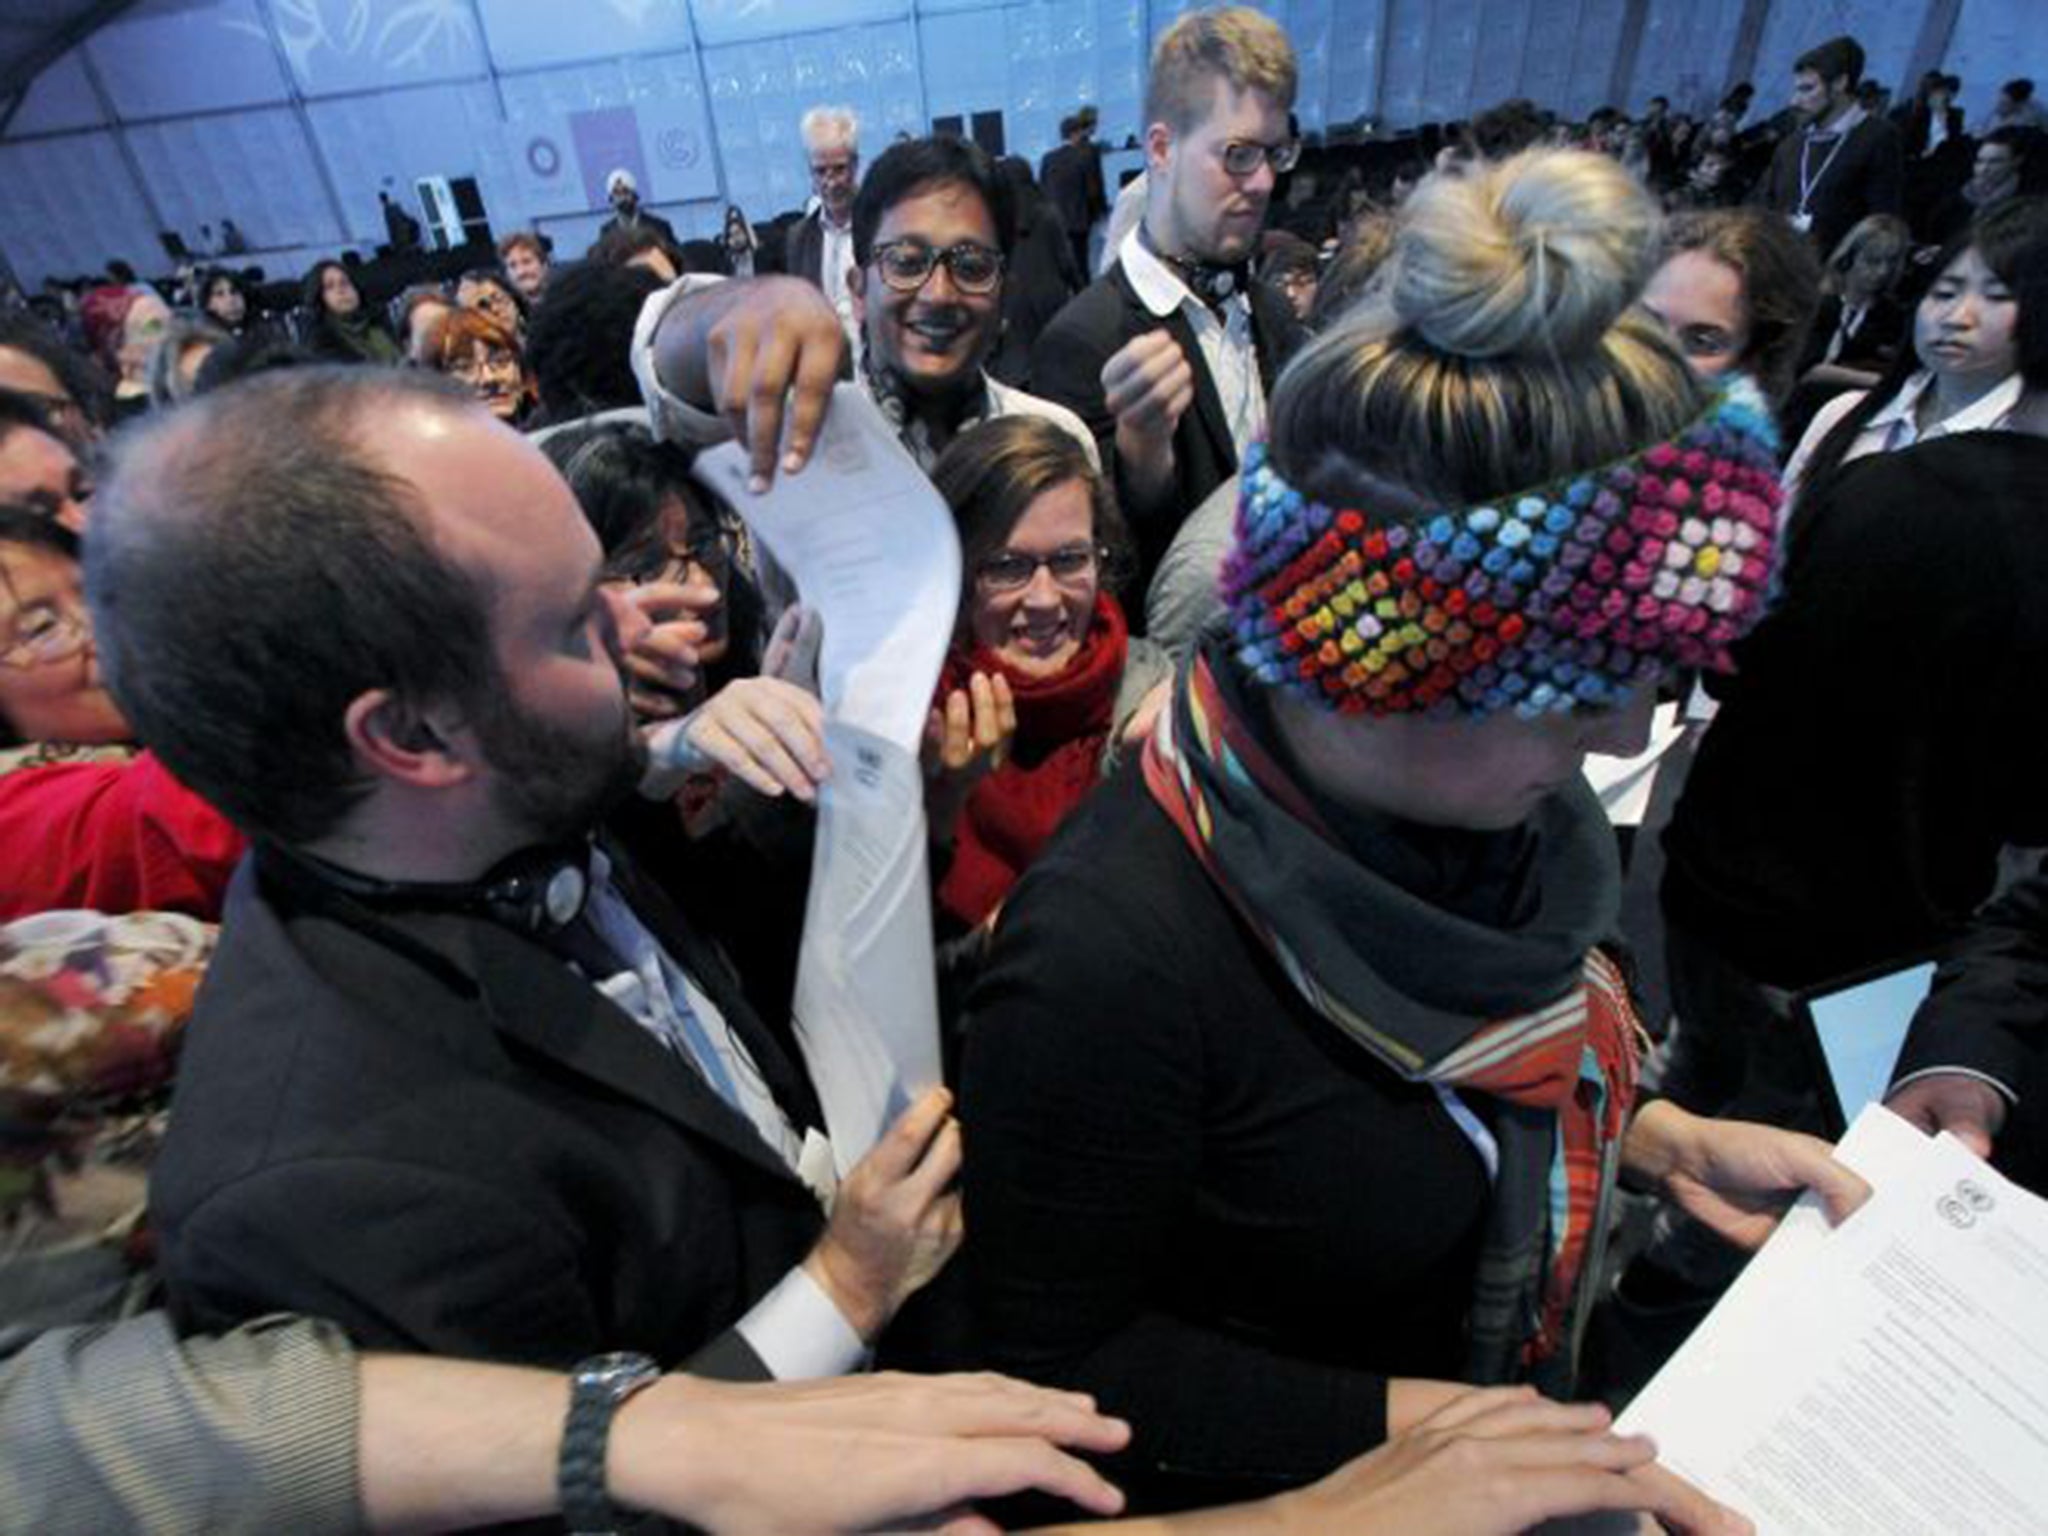 Delegates receive copies of the deal agreed at the UN climate change talks in Lima on Sunday